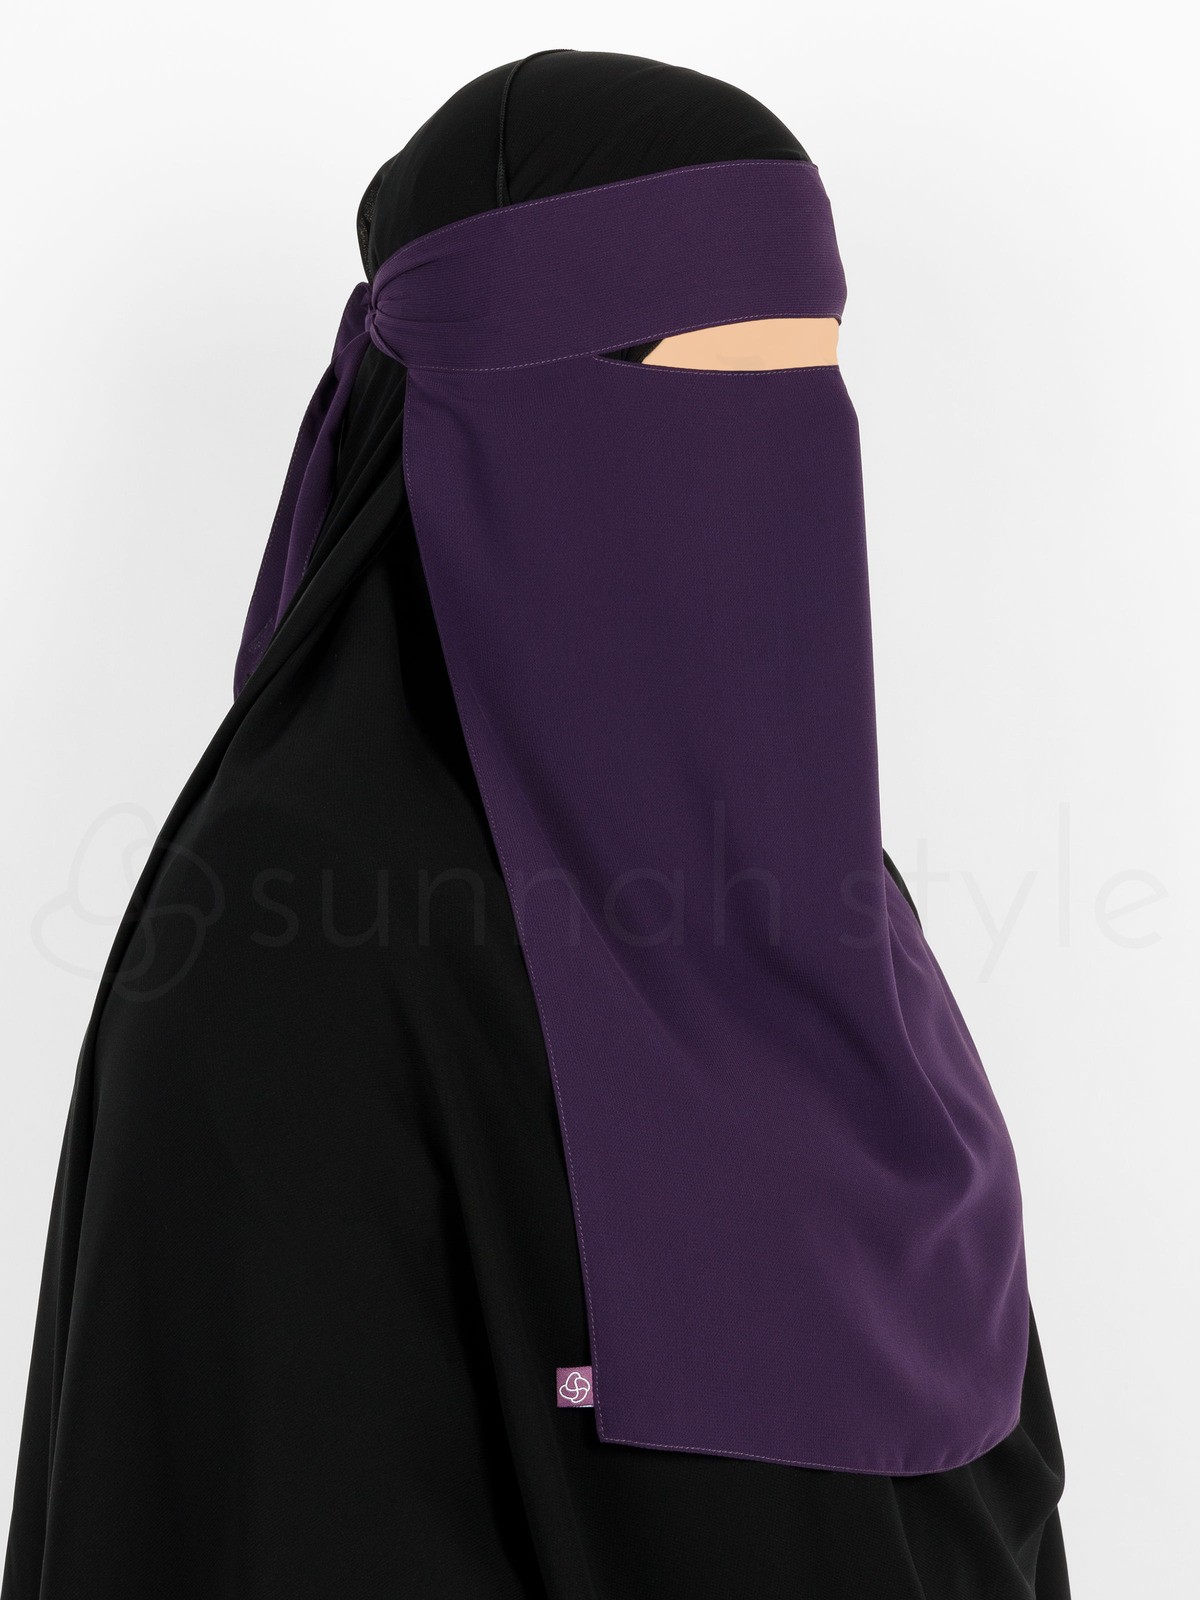 Sunnah Style - One Layer Niqab (Violet)